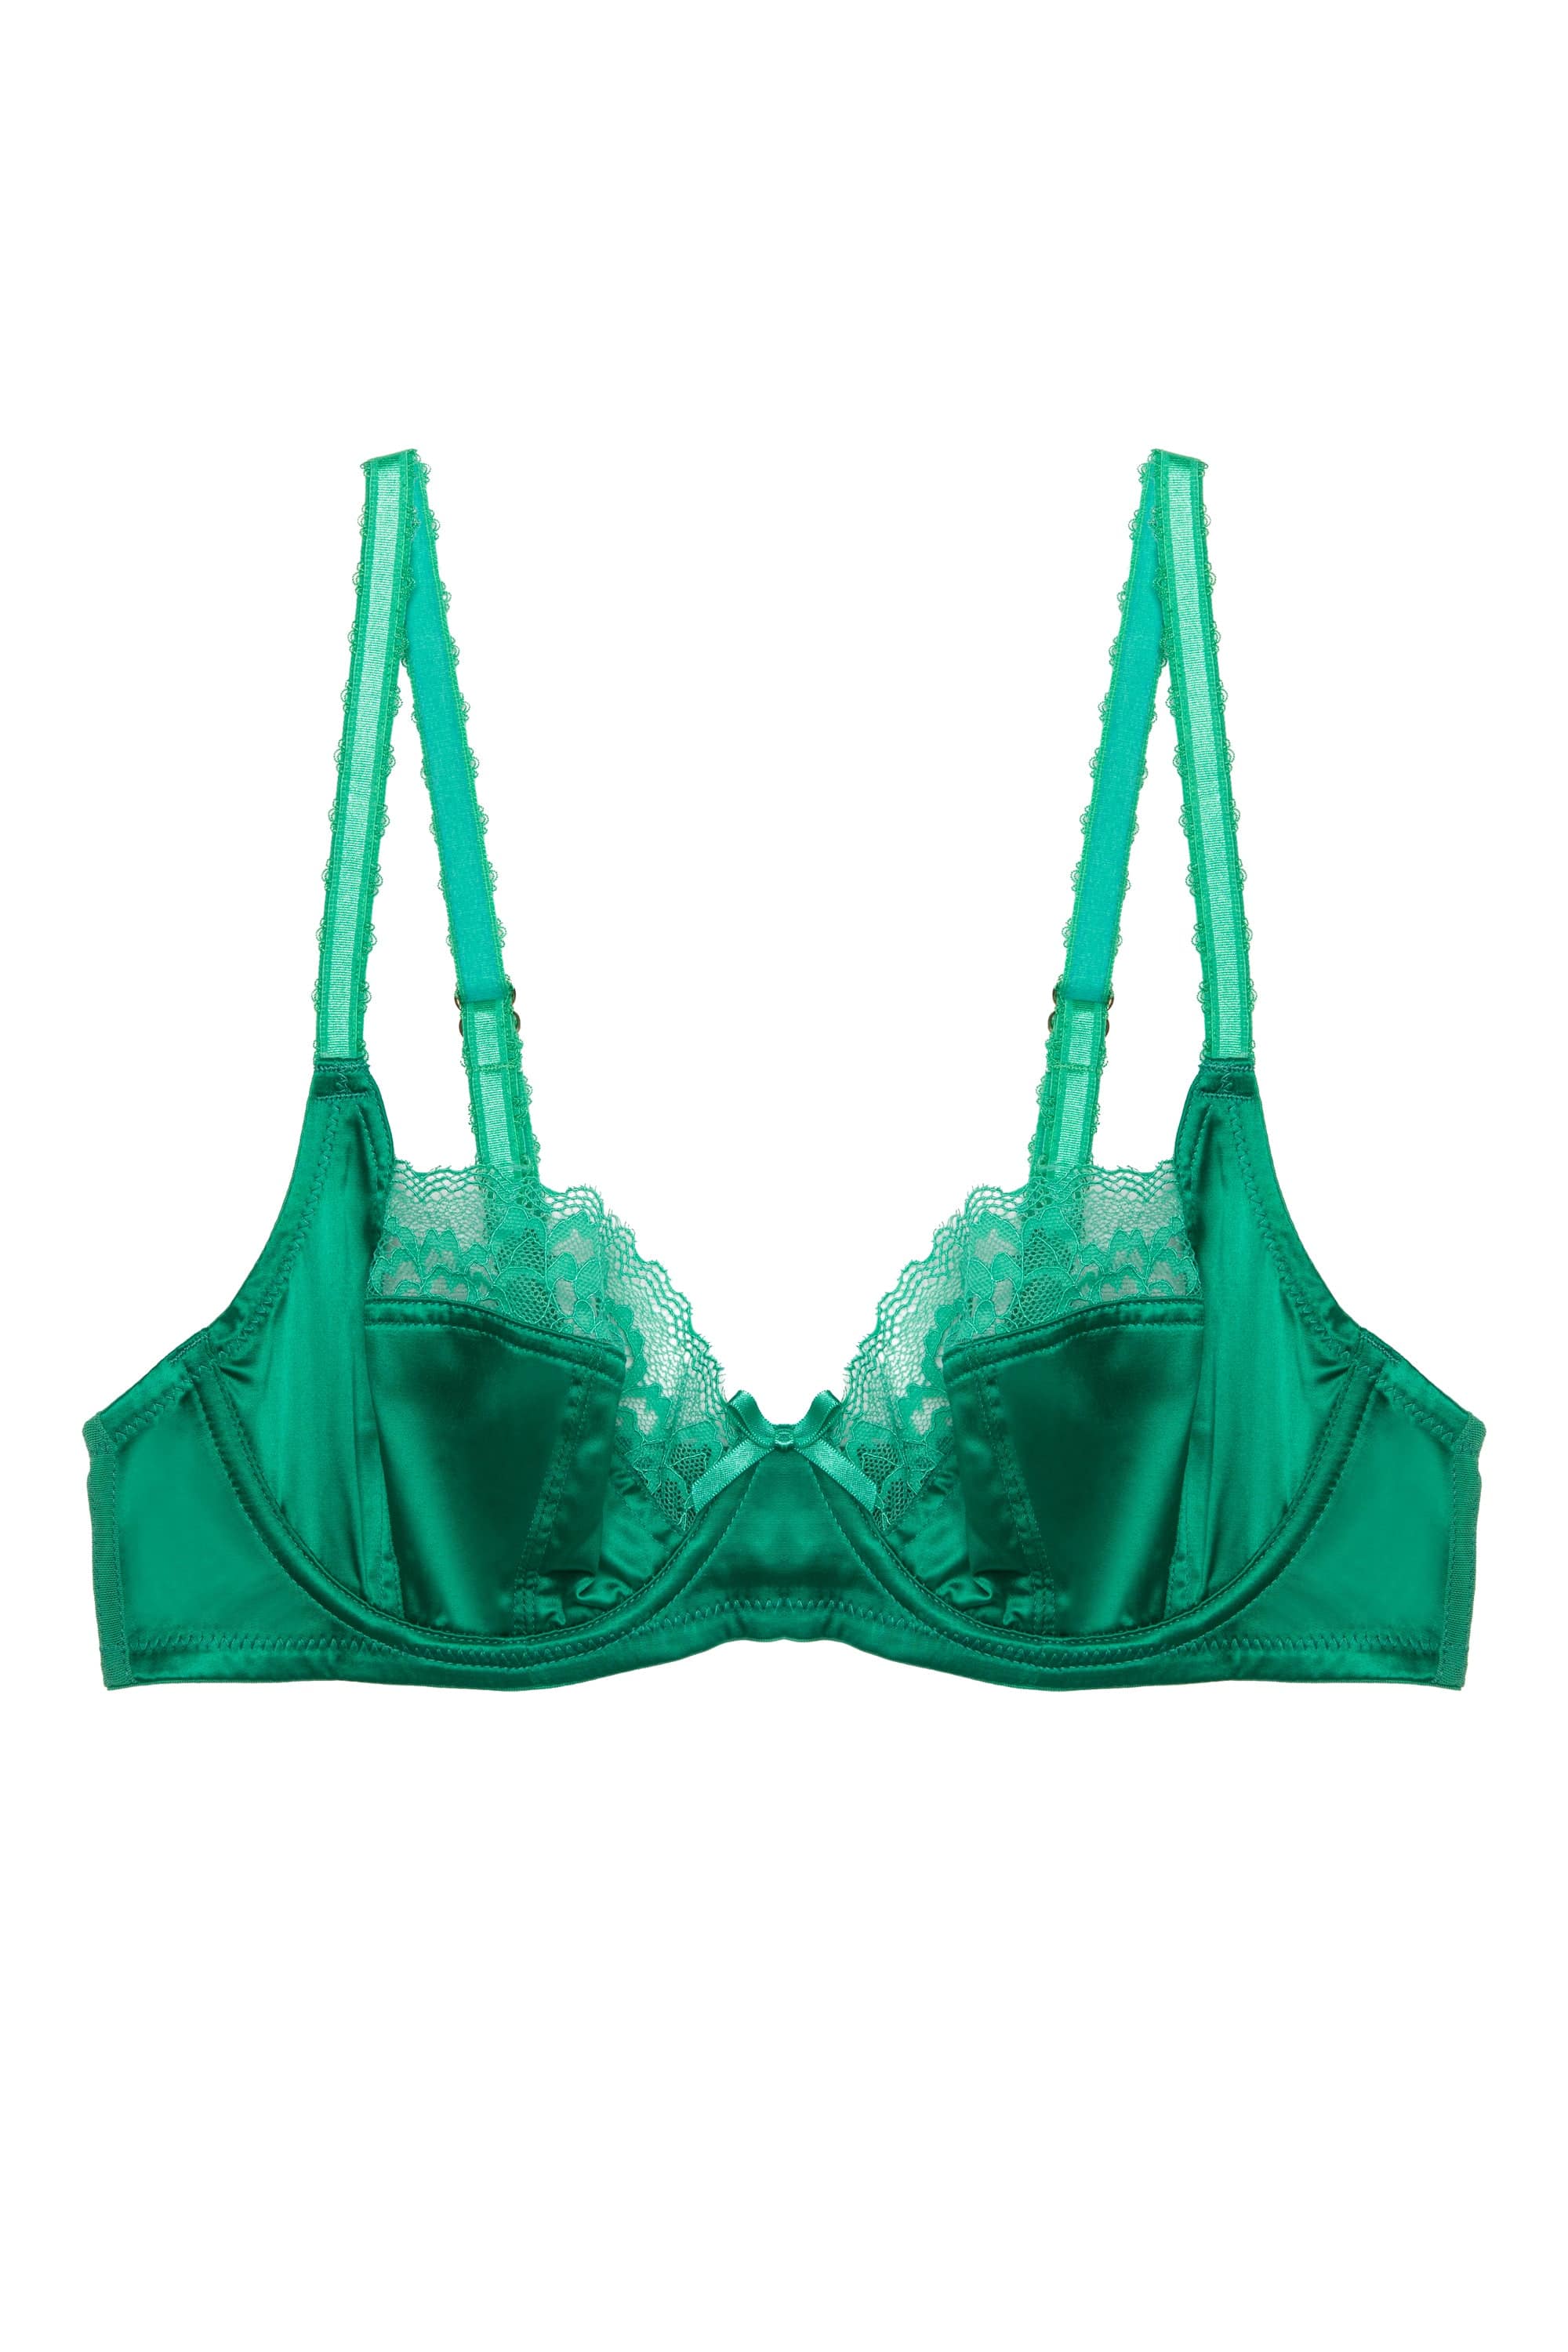 Pretty Polly Women's Botanical Lace Underwired Balconette Bra, Green  (Sage), 30D at  Women's Clothing store